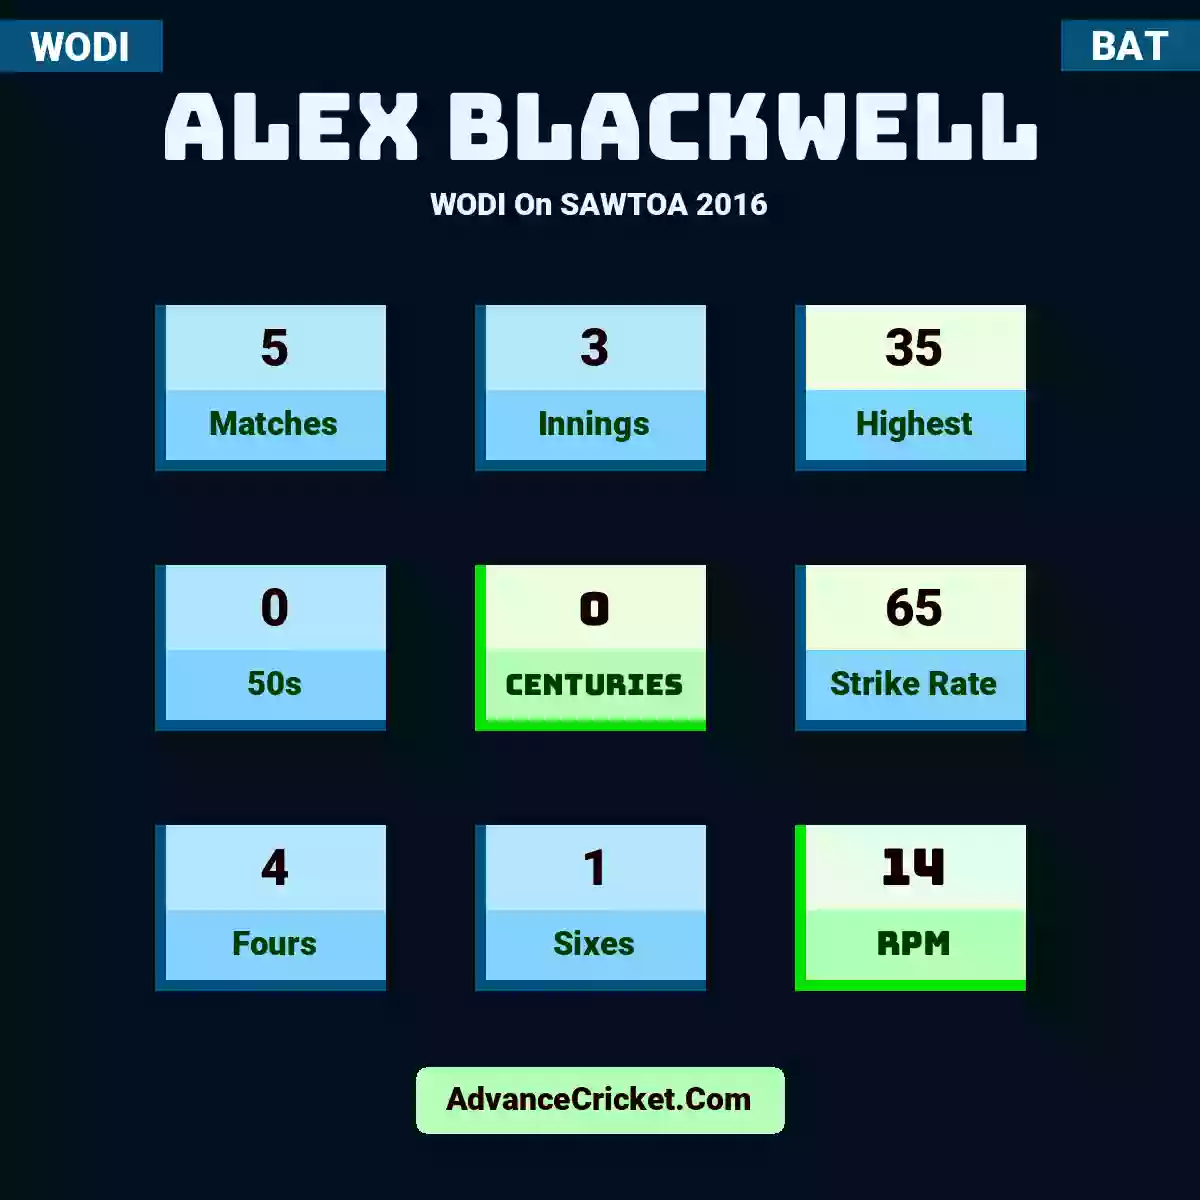 Alex Blackwell WODI  On SAWTOA 2016, Alex Blackwell played 5 matches, scored 35 runs as highest, 0 half-centuries, and 0 centuries, with a strike rate of 65. A.Blackwell hit 4 fours and 1 sixes, with an RPM of 14.